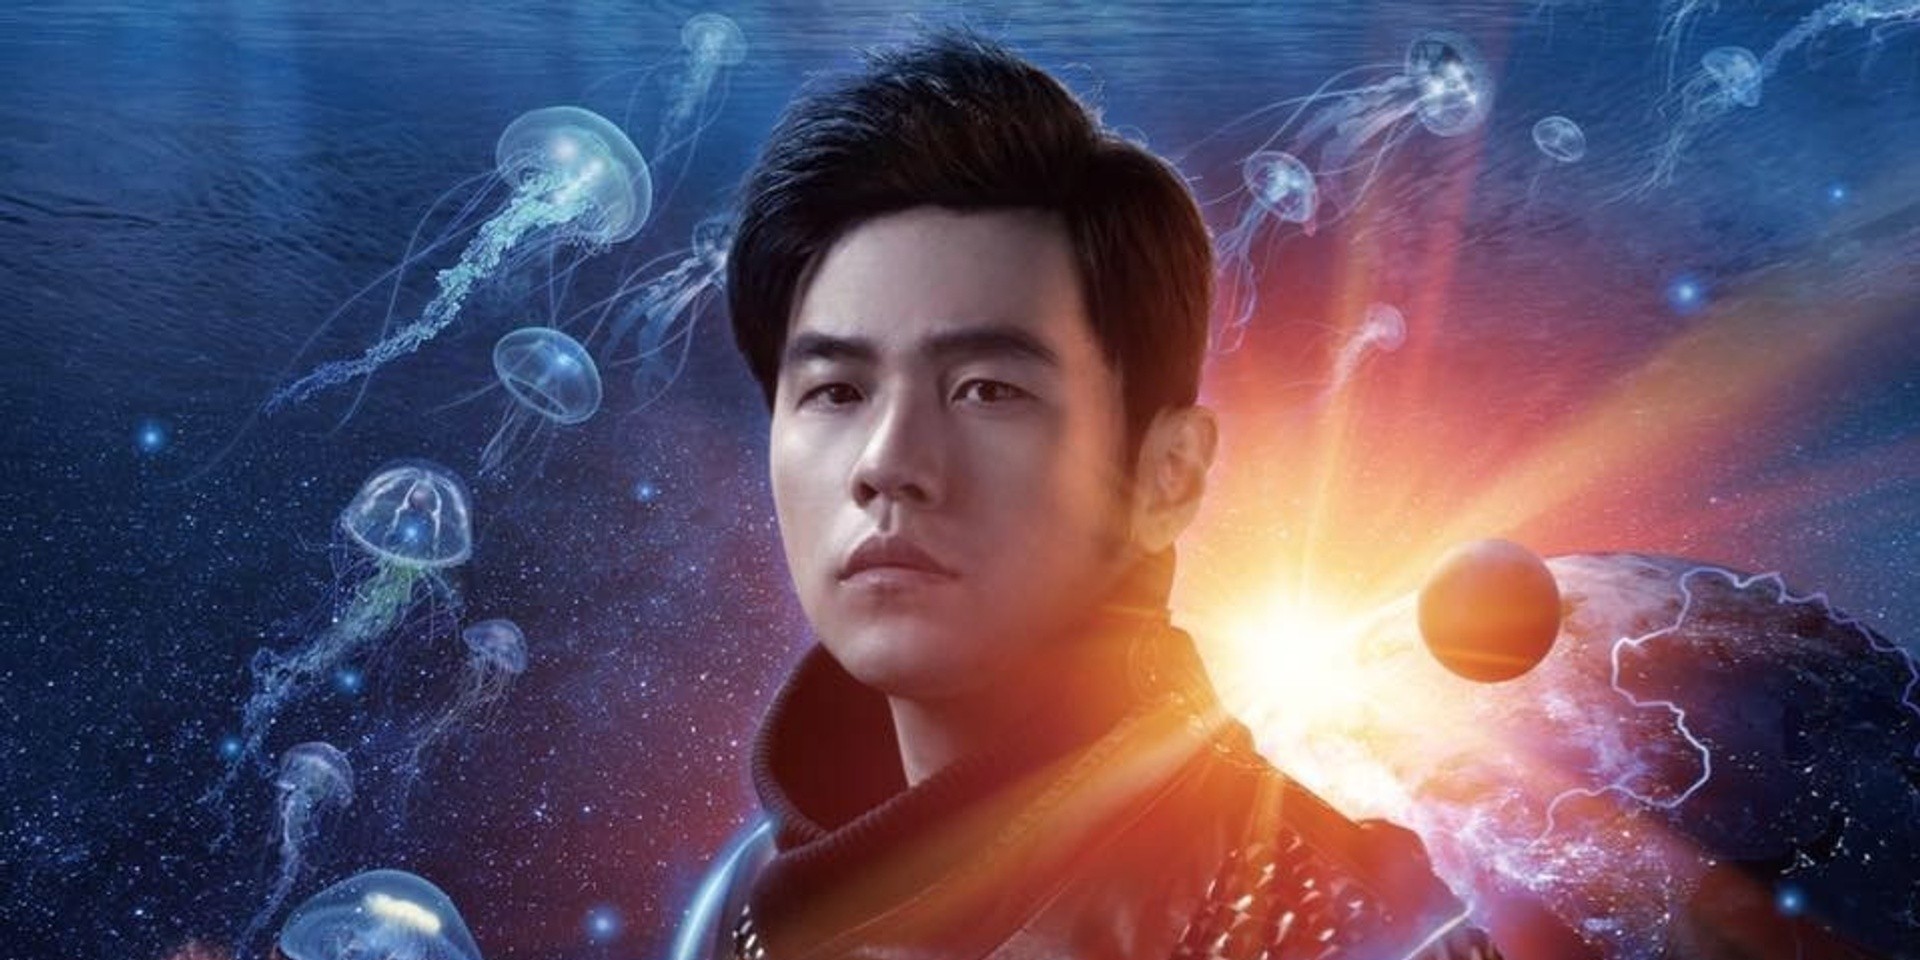 Jay Chou tickets to go on sale July 7th, so prepare yourselves